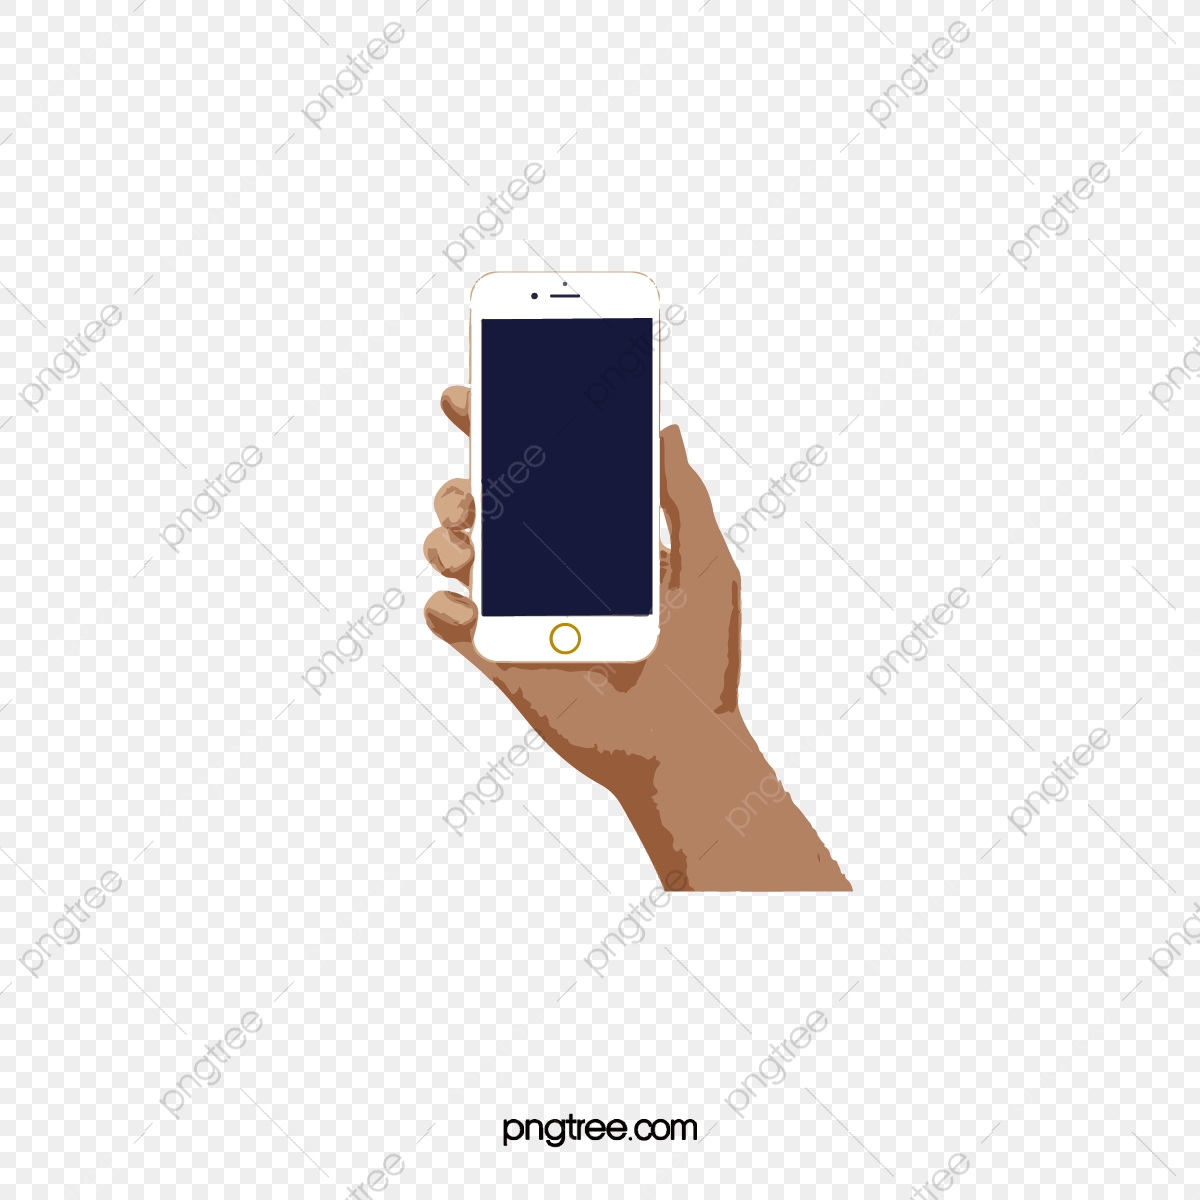 iphone clipart file